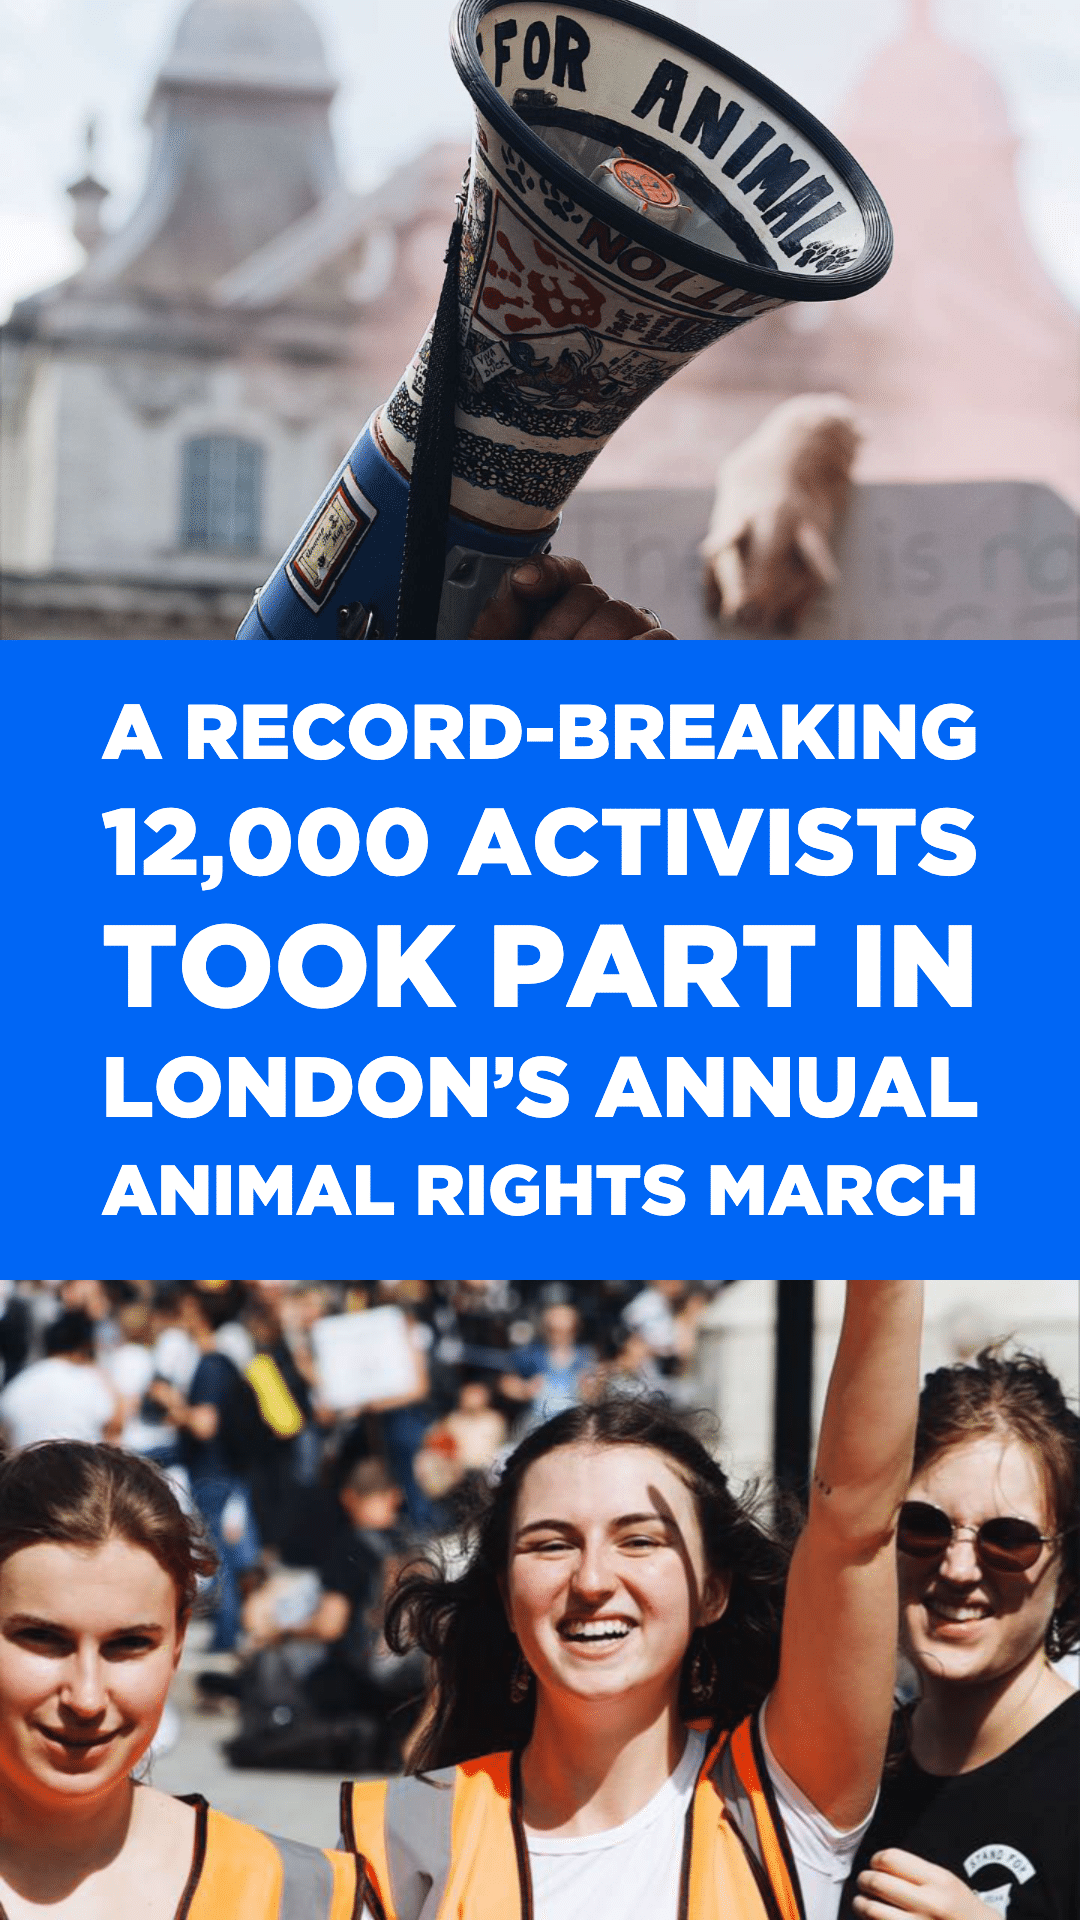 A Record-Breaking 12,000 Activists Took Part in London’s Annual Animal